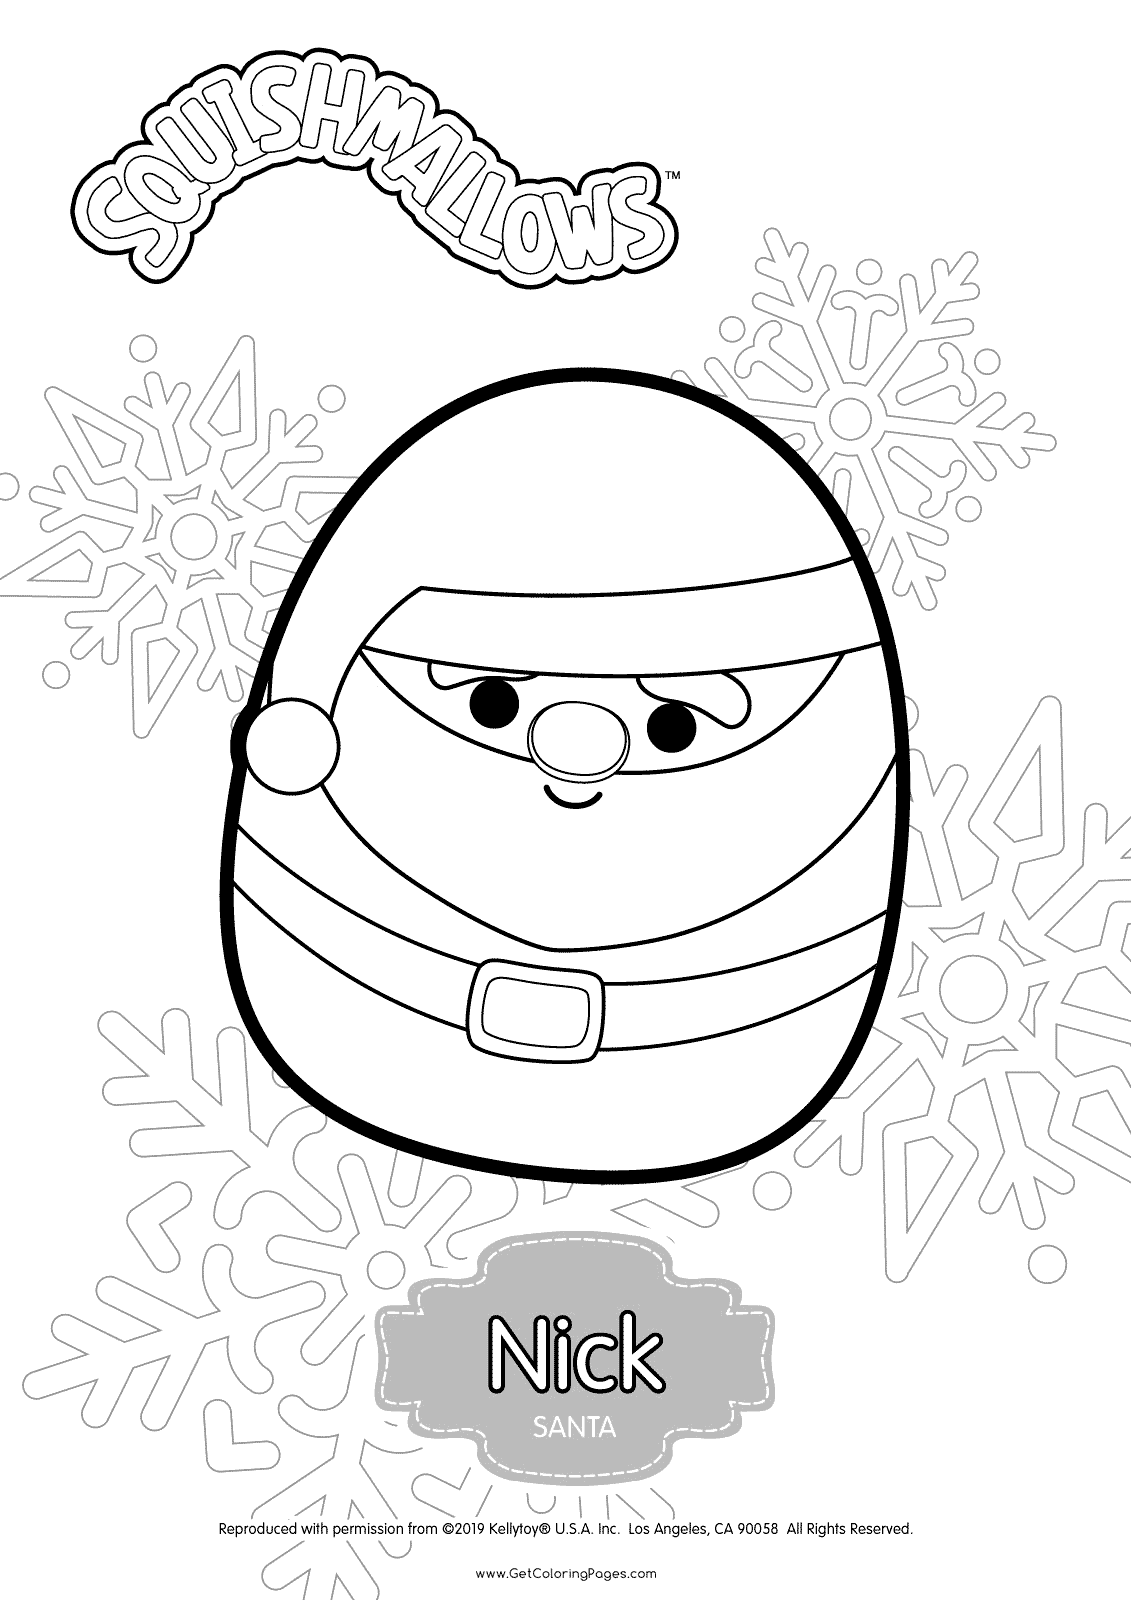 Nick Santa Squishmallows Coloring Pages - Get Coloring Pages